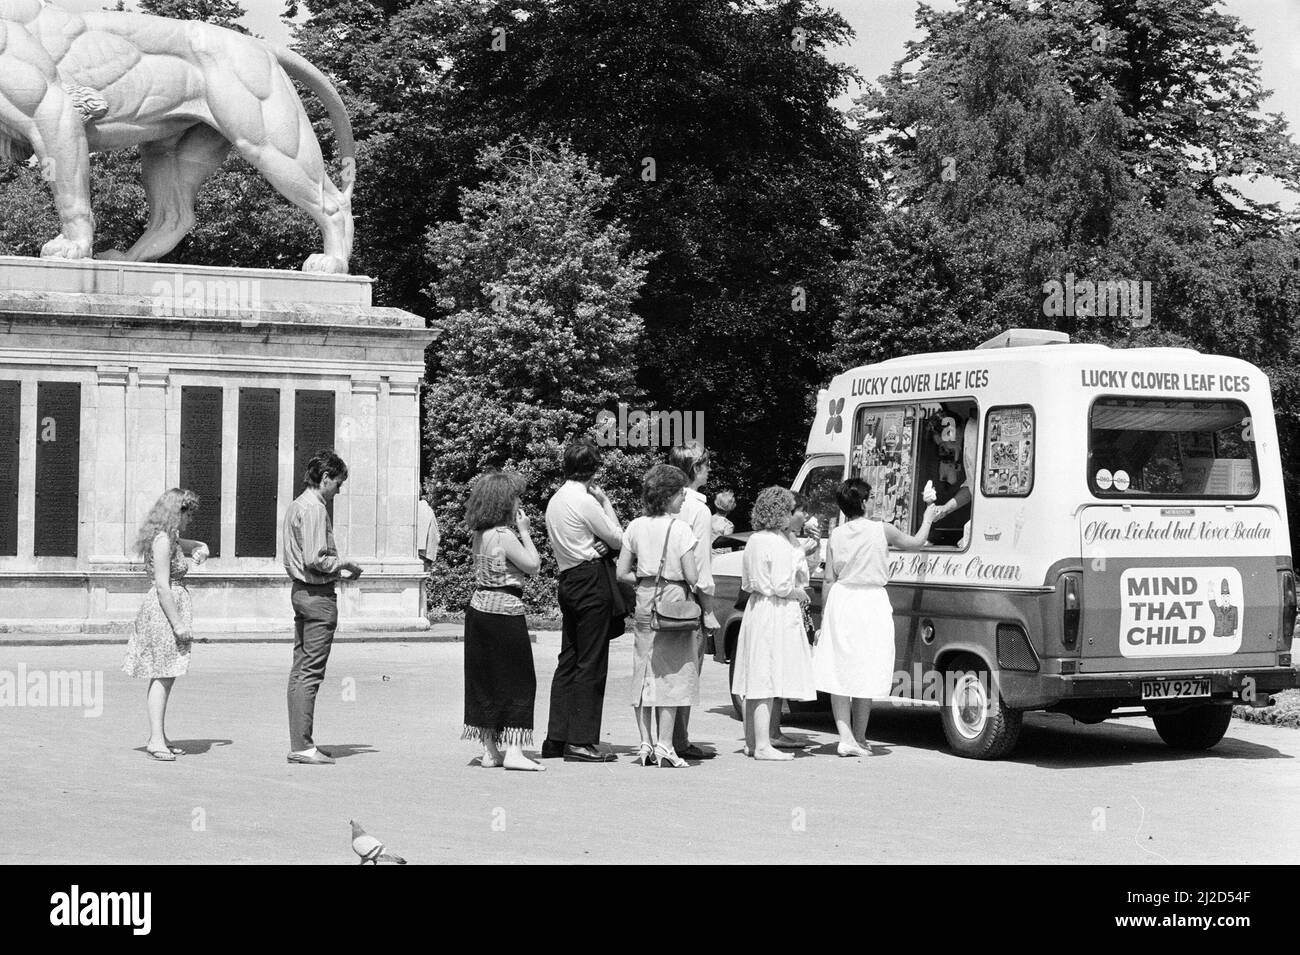 Summer Pics, Forbury Gardens, Public Park, Reading, Berkshire, Giugno 1985. Lucky Clover Leaf ICES Foto Stock